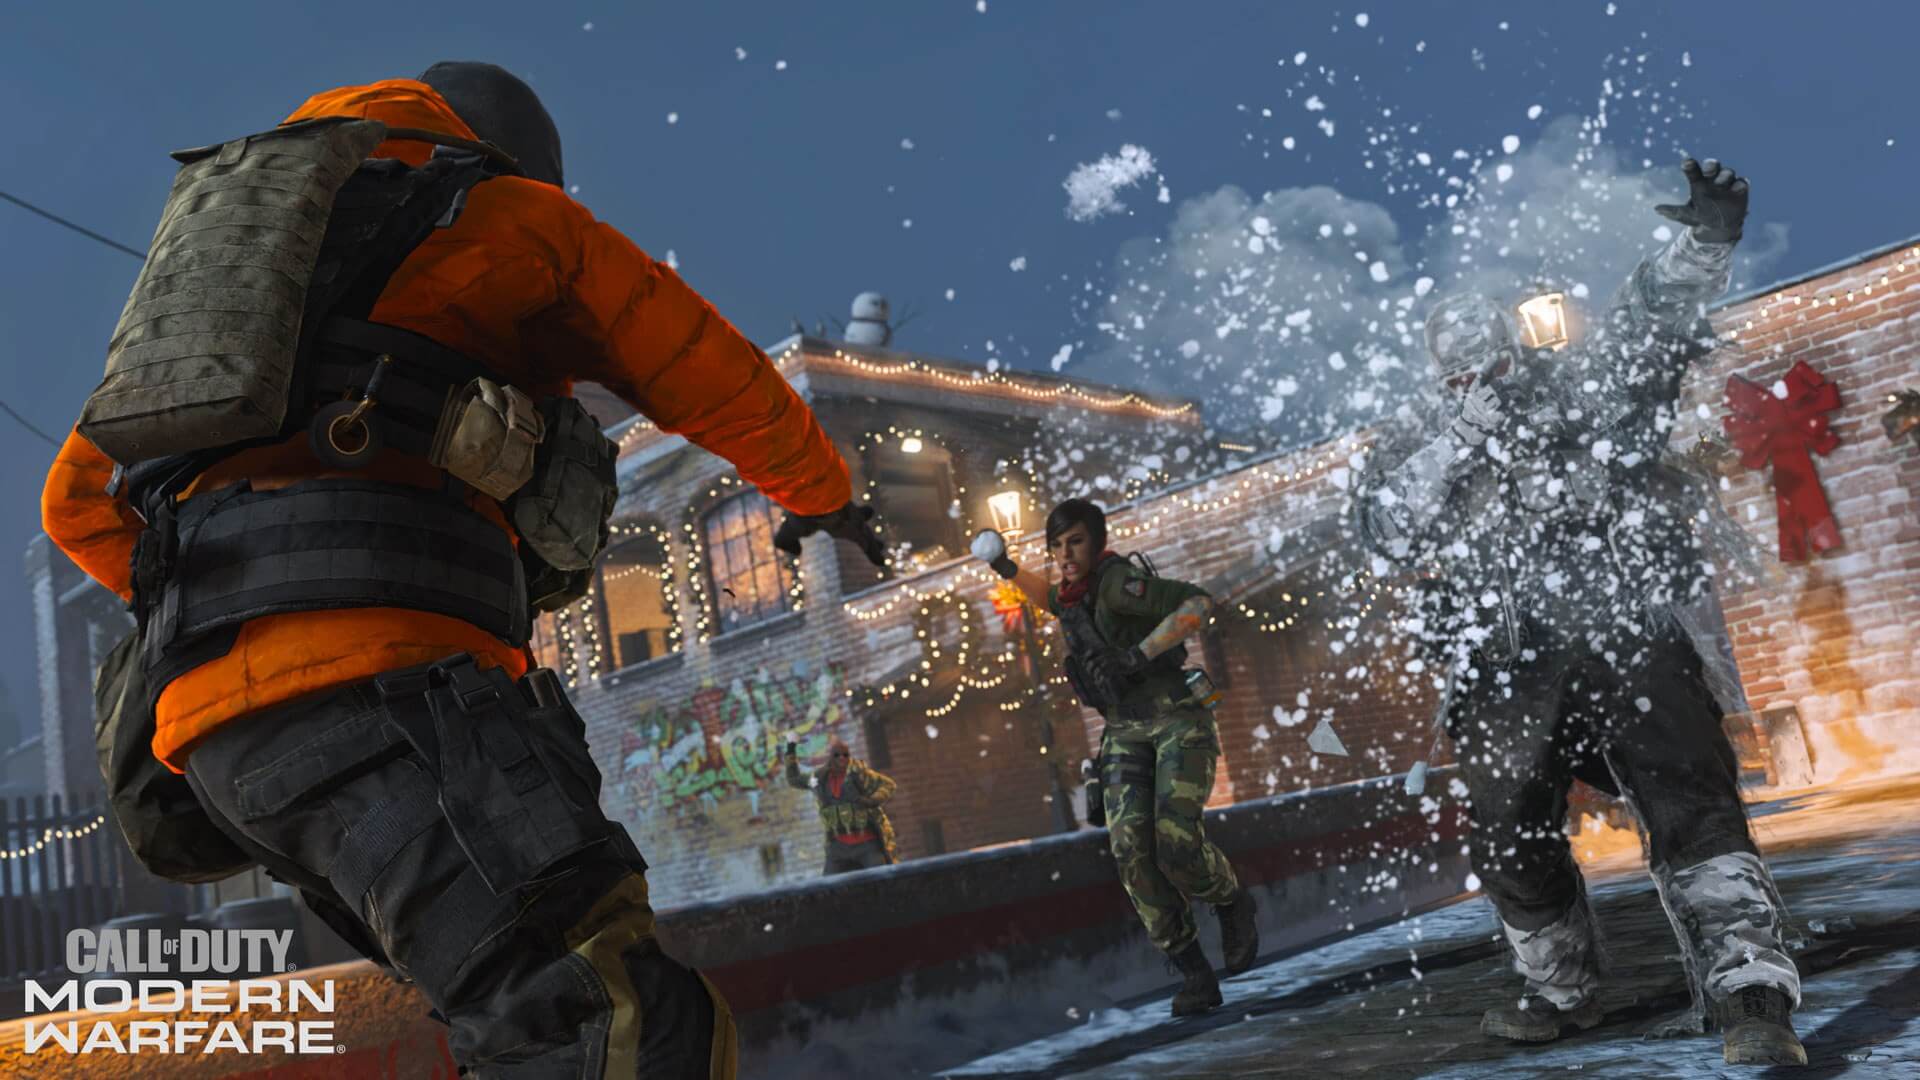 Activision adds a new snowball fight match to CoD: MW for the holidays